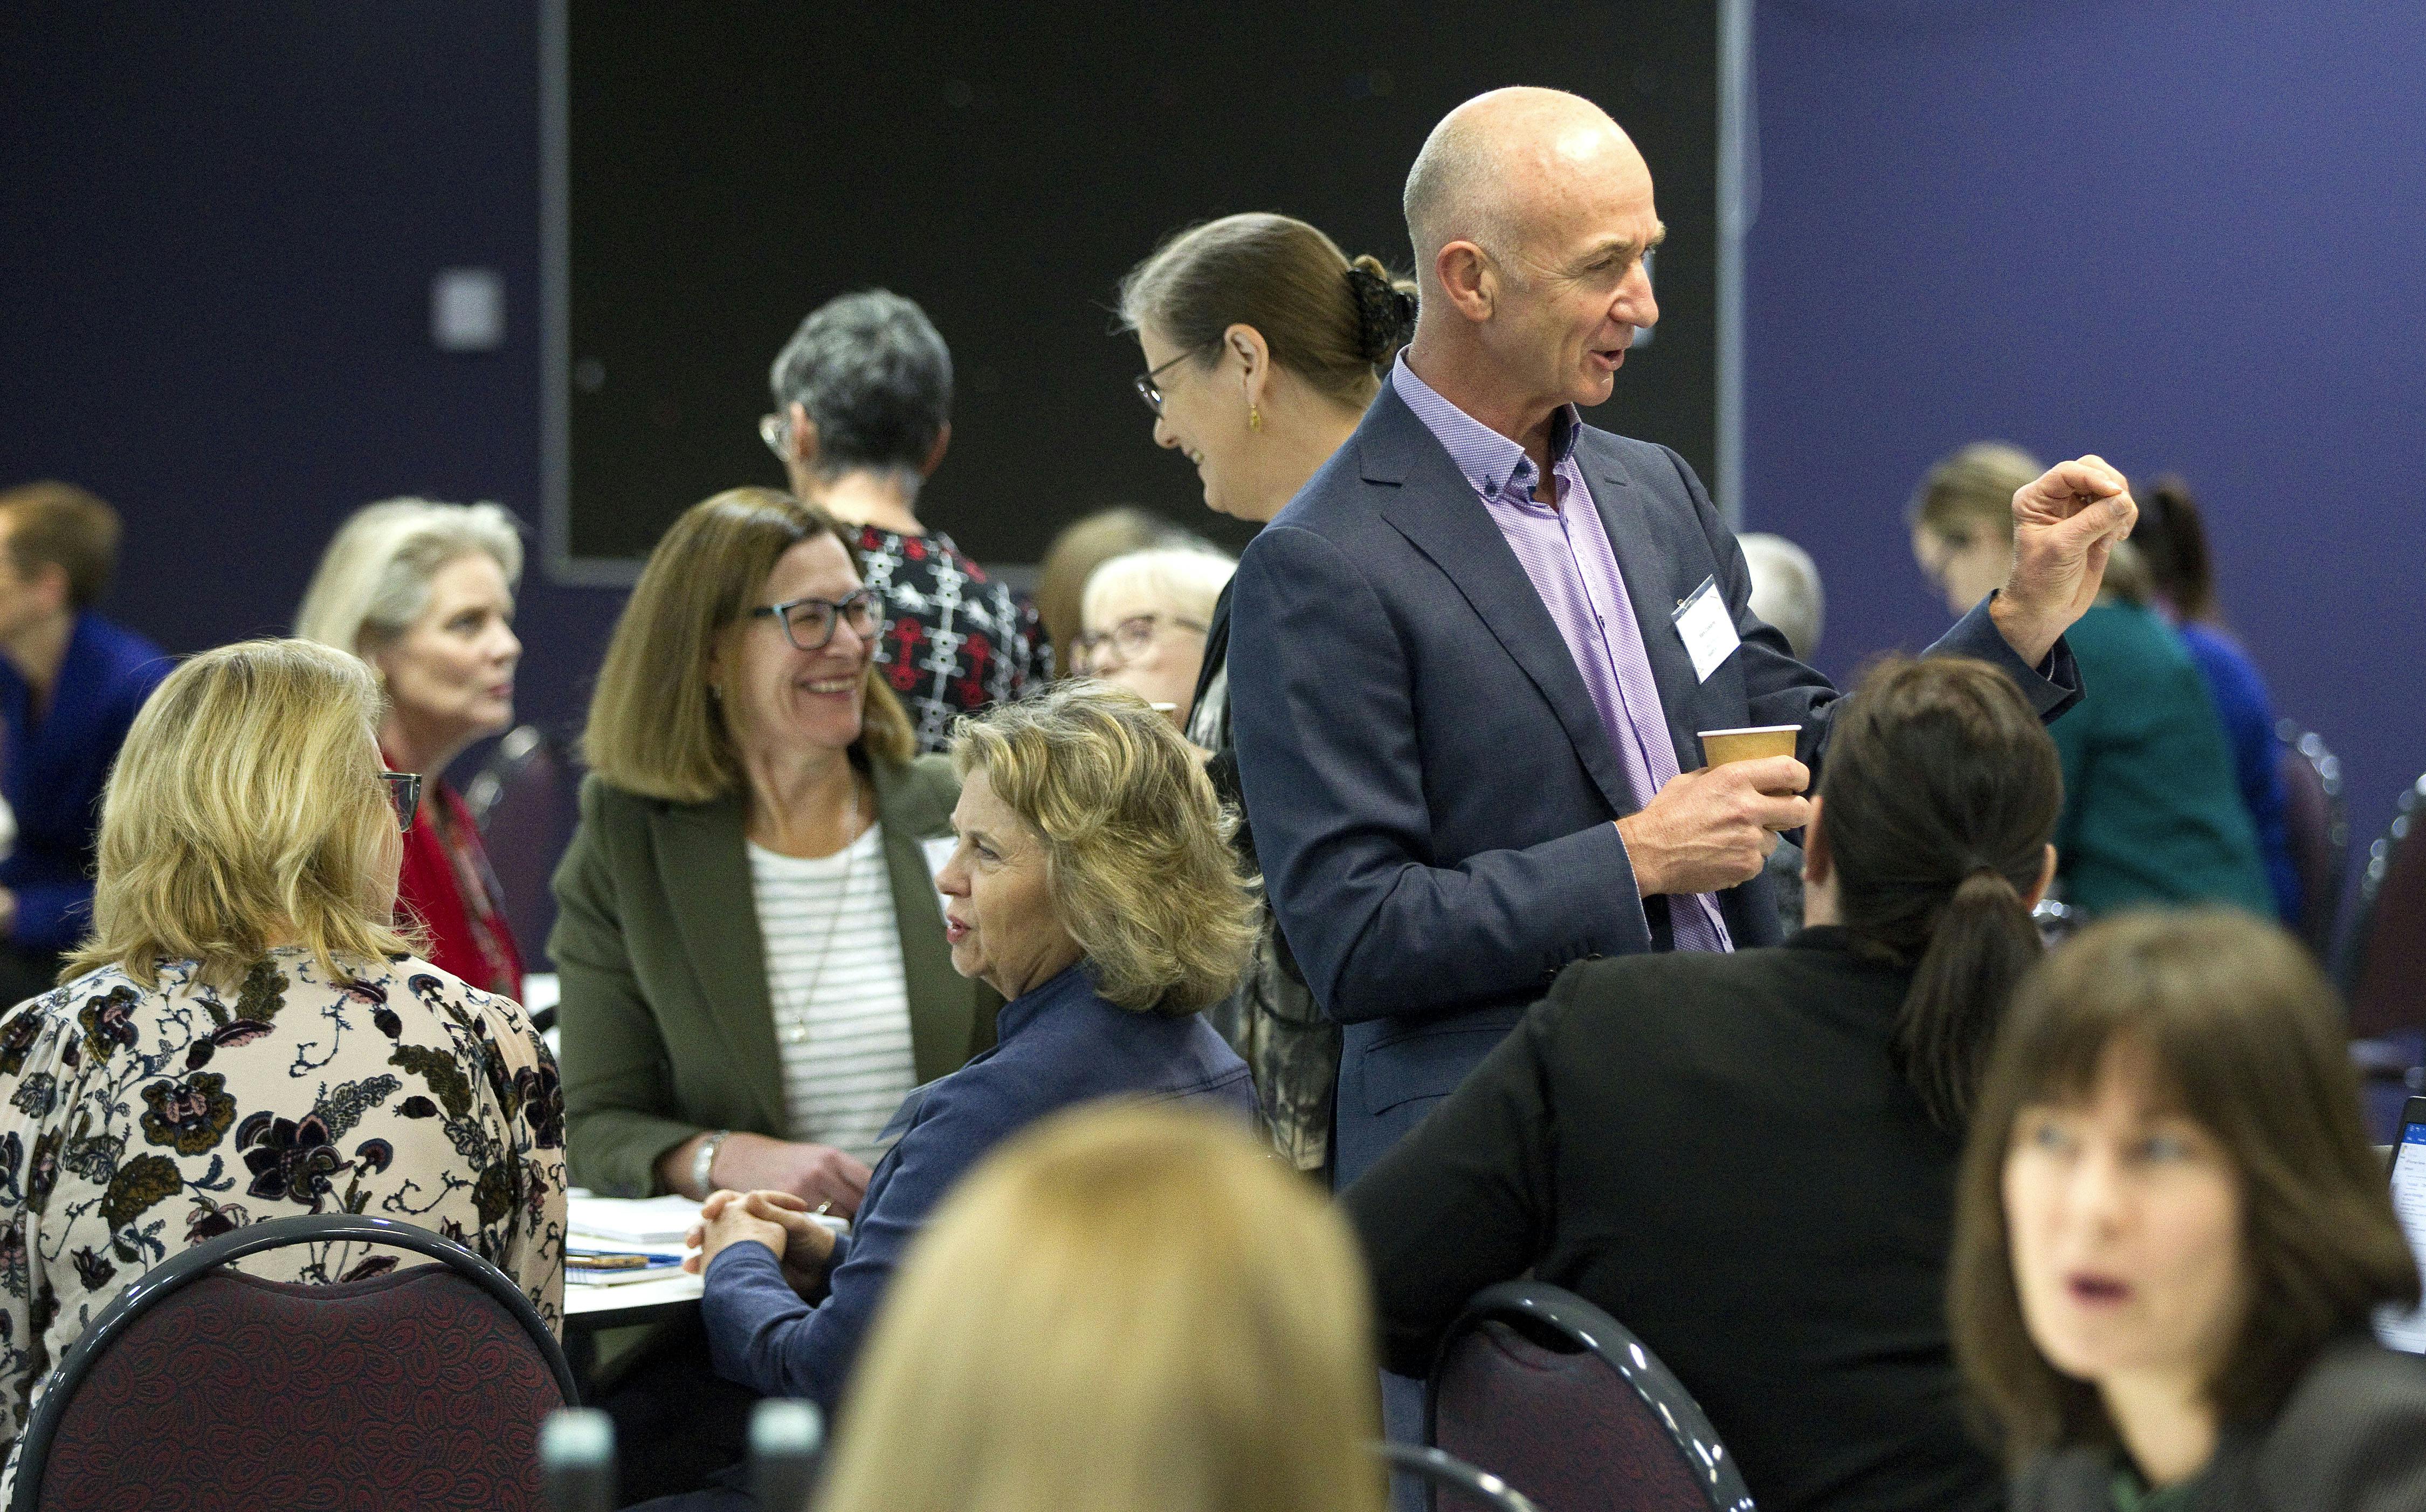 Networking at the Better Health, Together Forum - Federal Budget Insights 2021-22